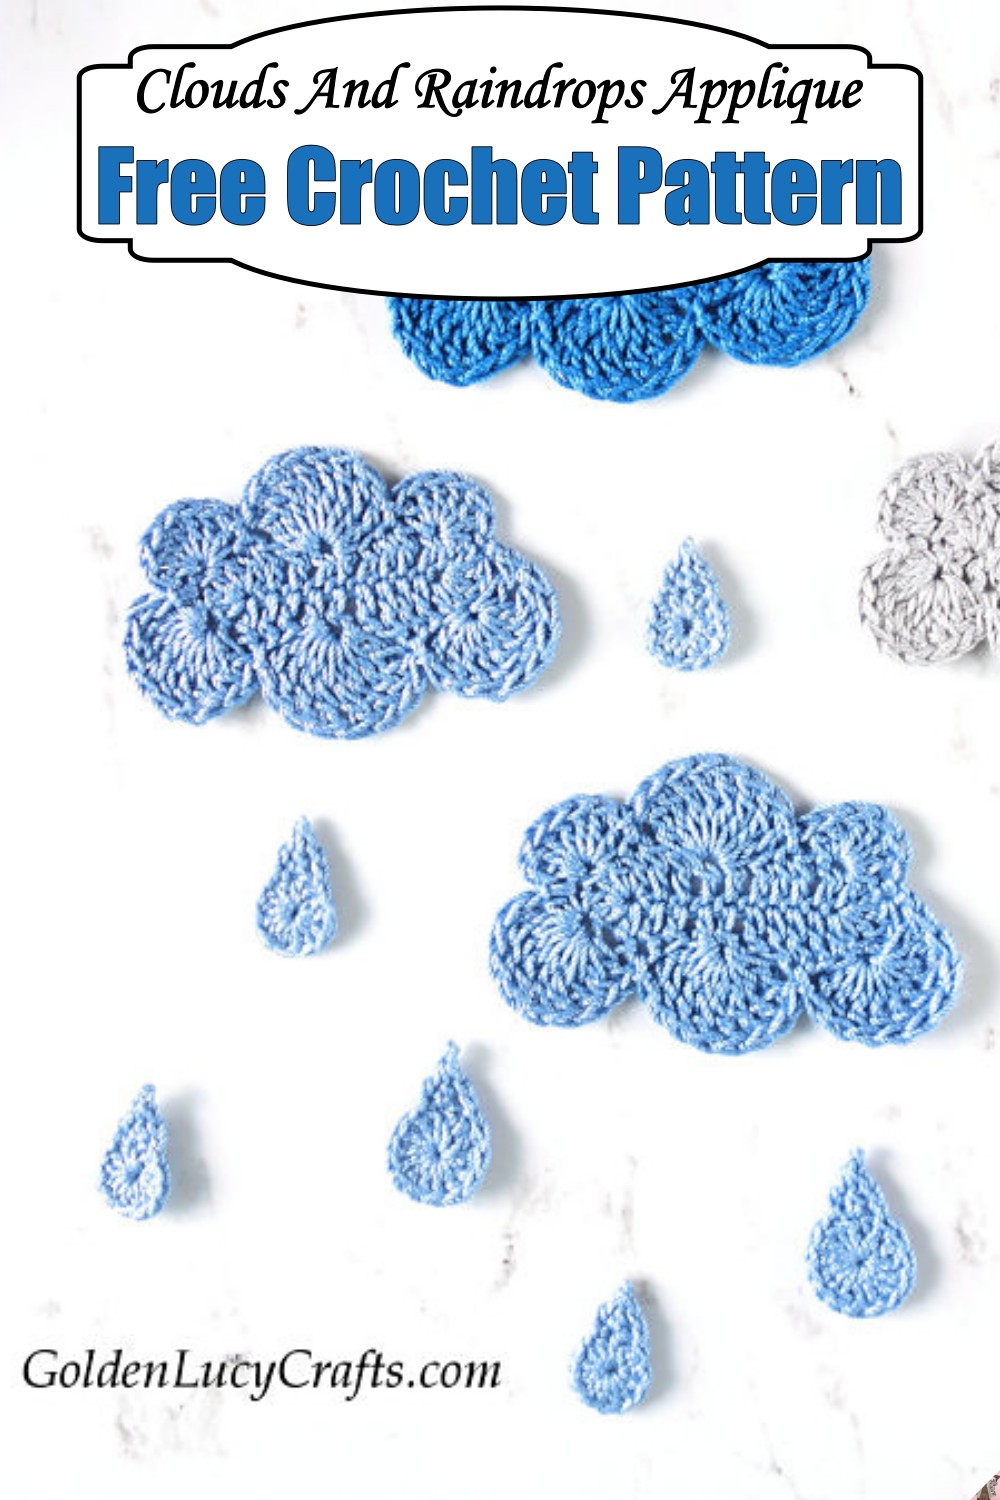 Clouds And Raindrops Applique